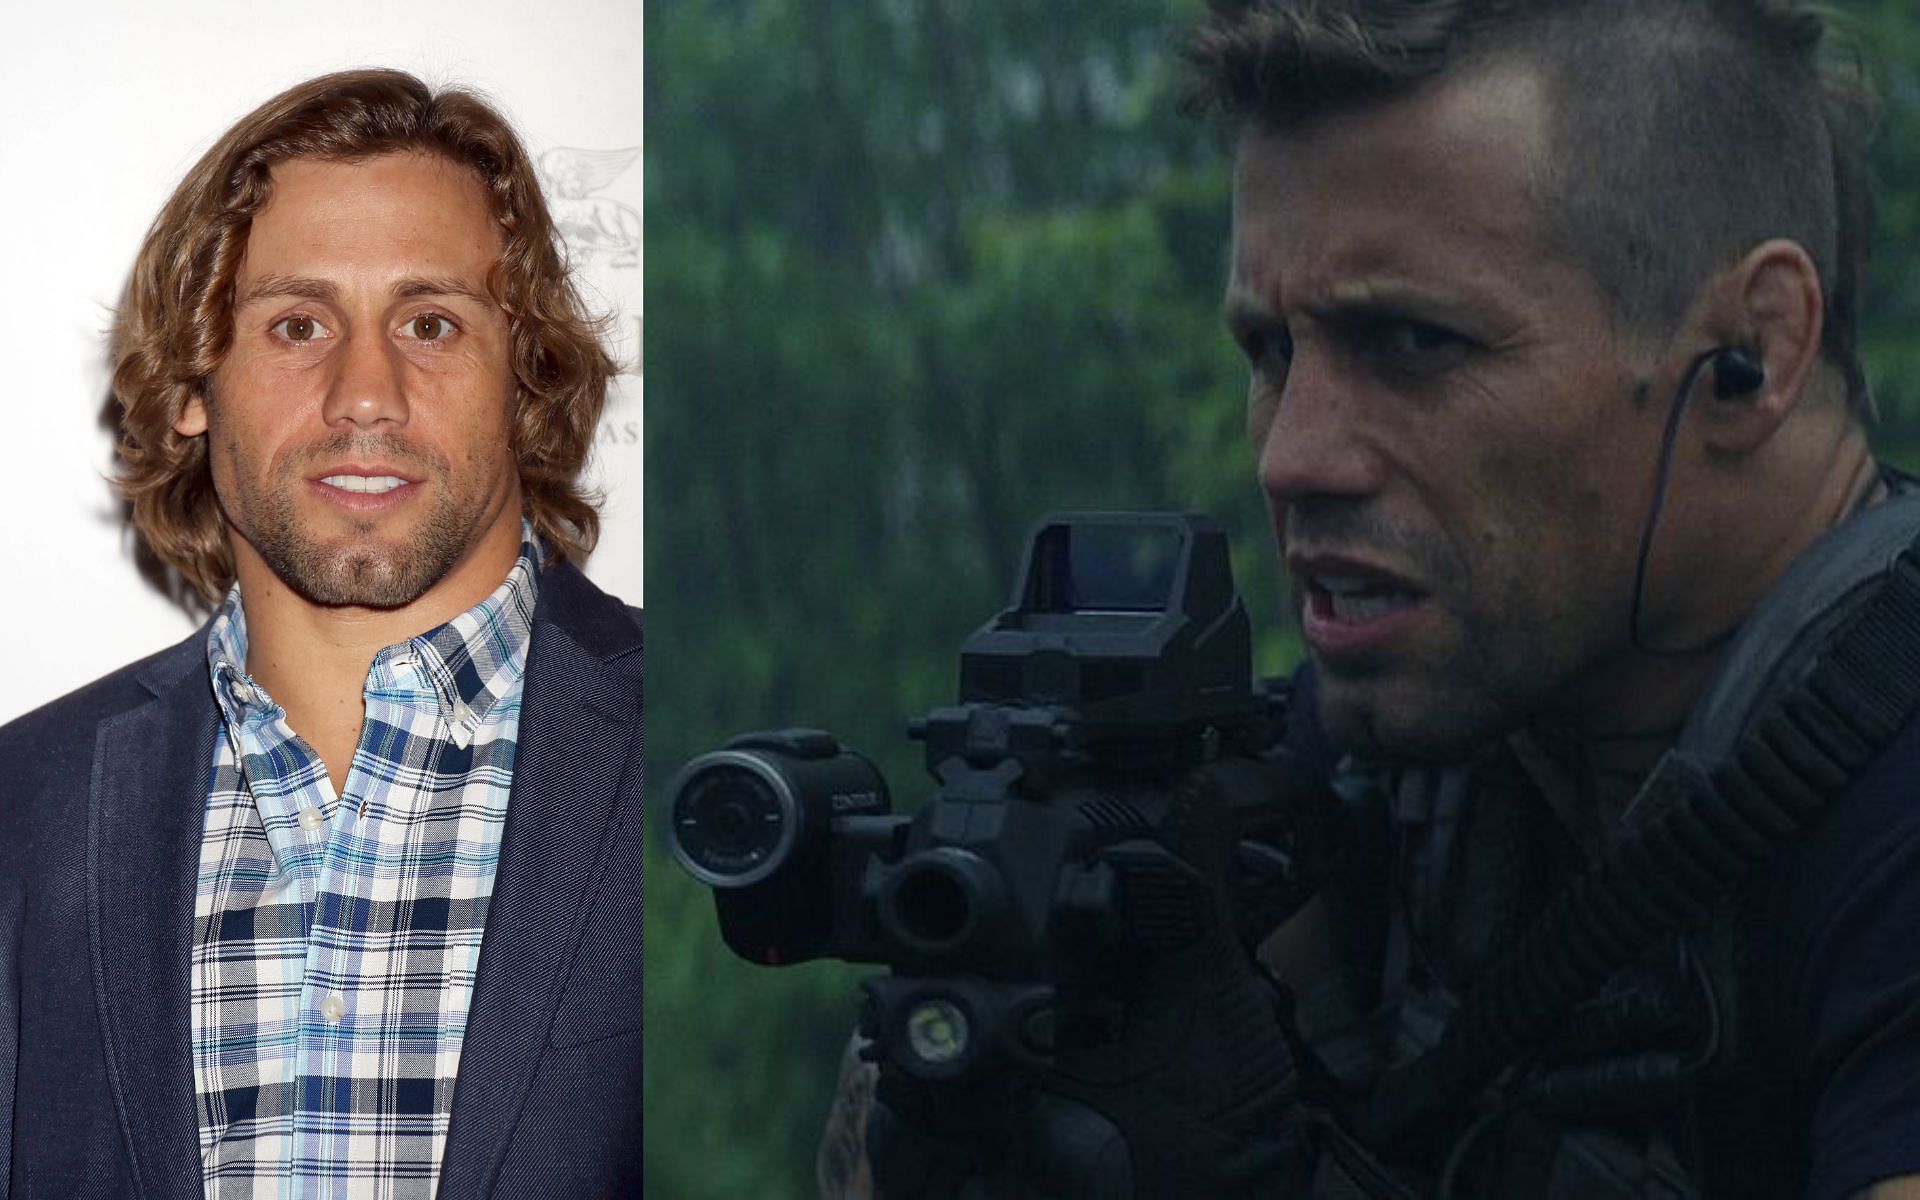 Urijah Faber (left) and his appearance in Rampage (right). [Images courtesy: left image from Shutterstock and right image from IMFDB]